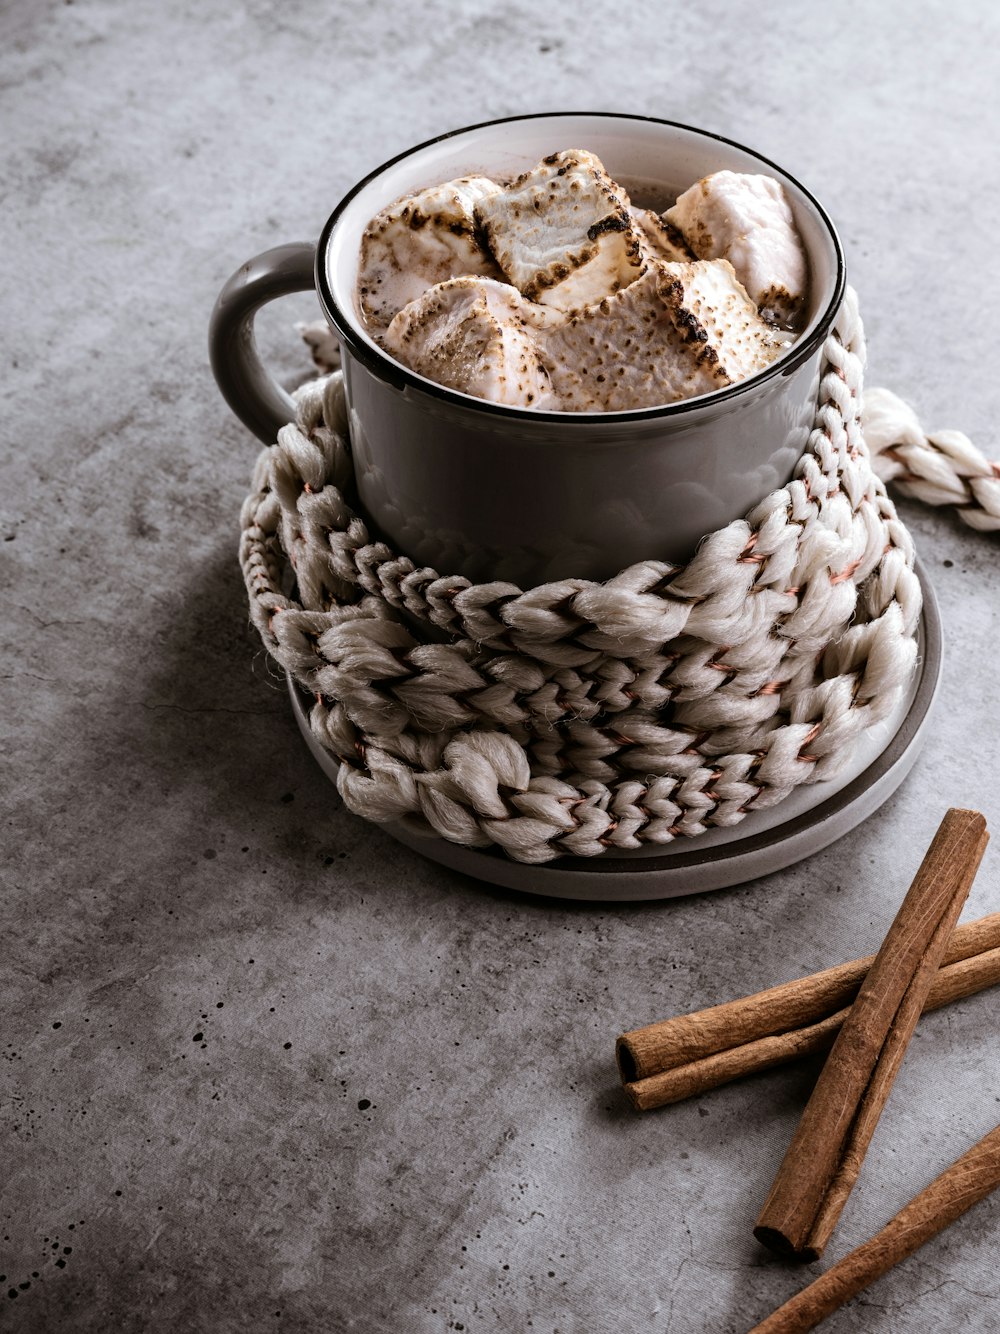 a cup of hot chocolate and cinnamon sticks